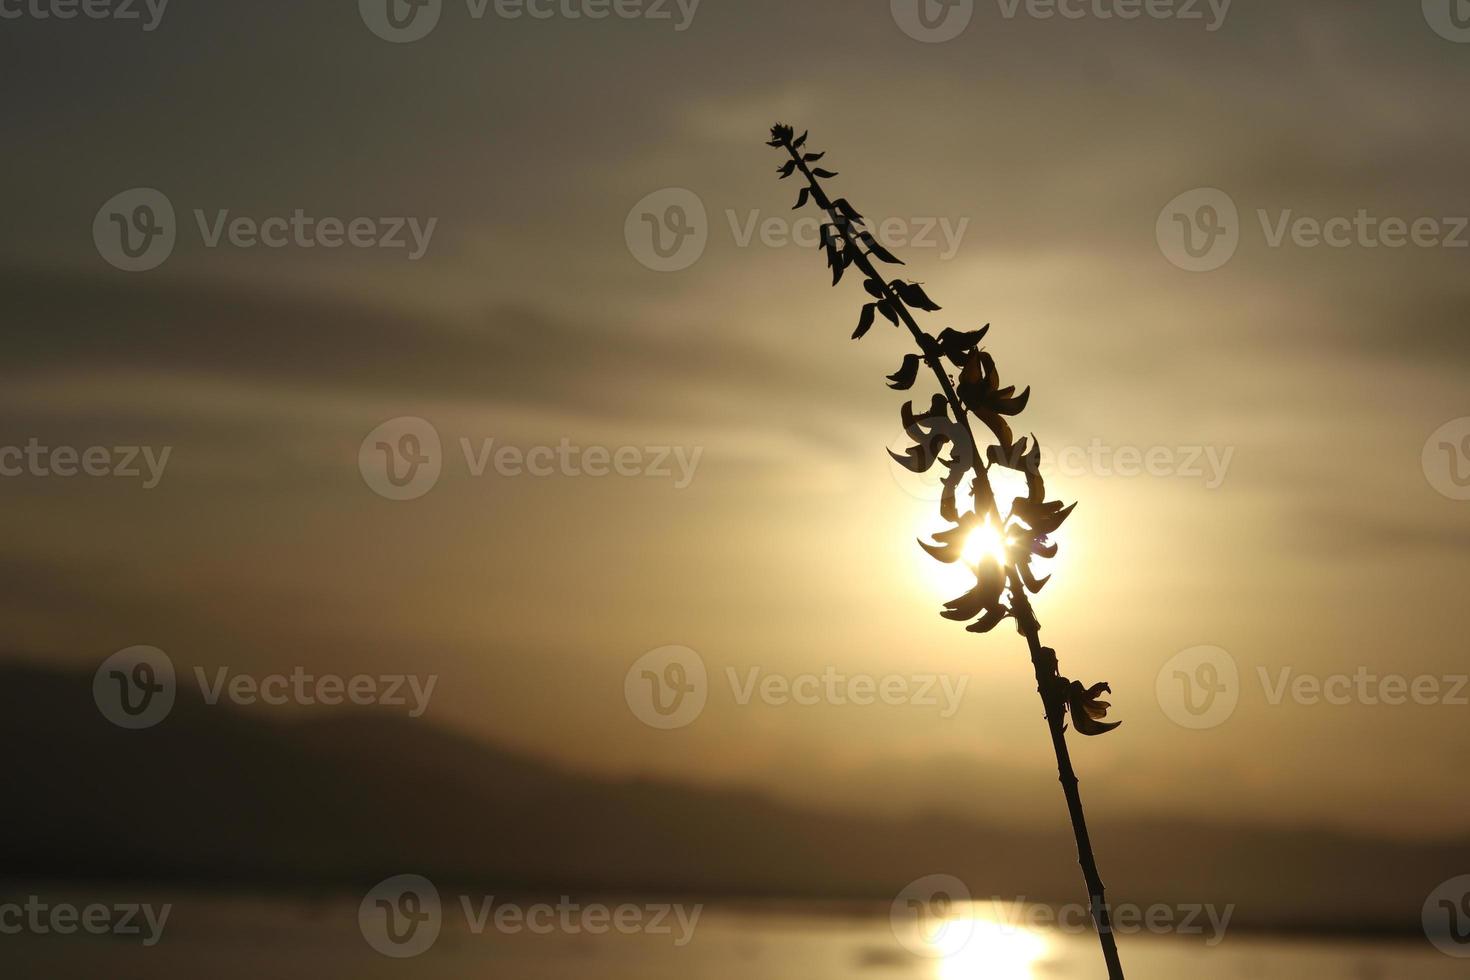 silhouettes of plants against the background of the sunset on the lake photo